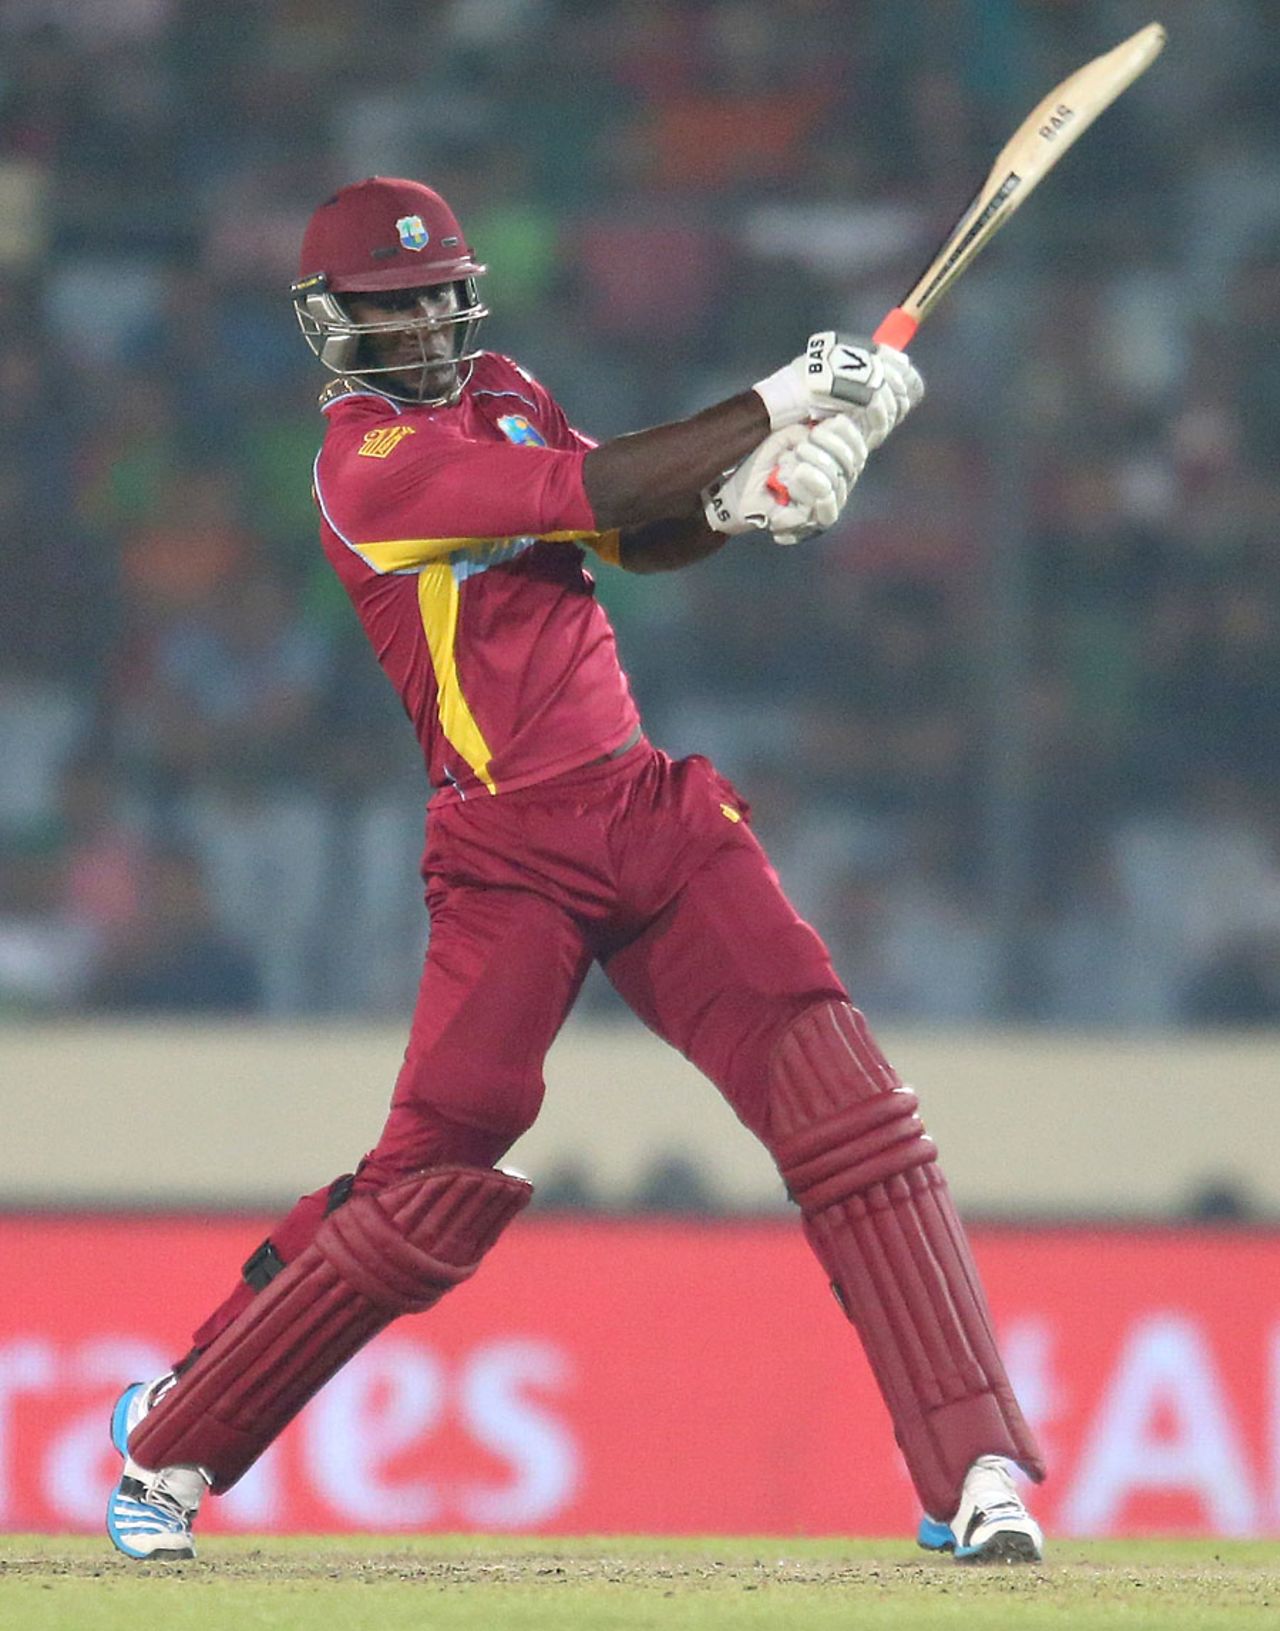 Darren Sammy finished the innings with an electric 42 off 20 balls, Pakistan v West Indies, World T20, Group 2, Mirpur, April 1, 2014